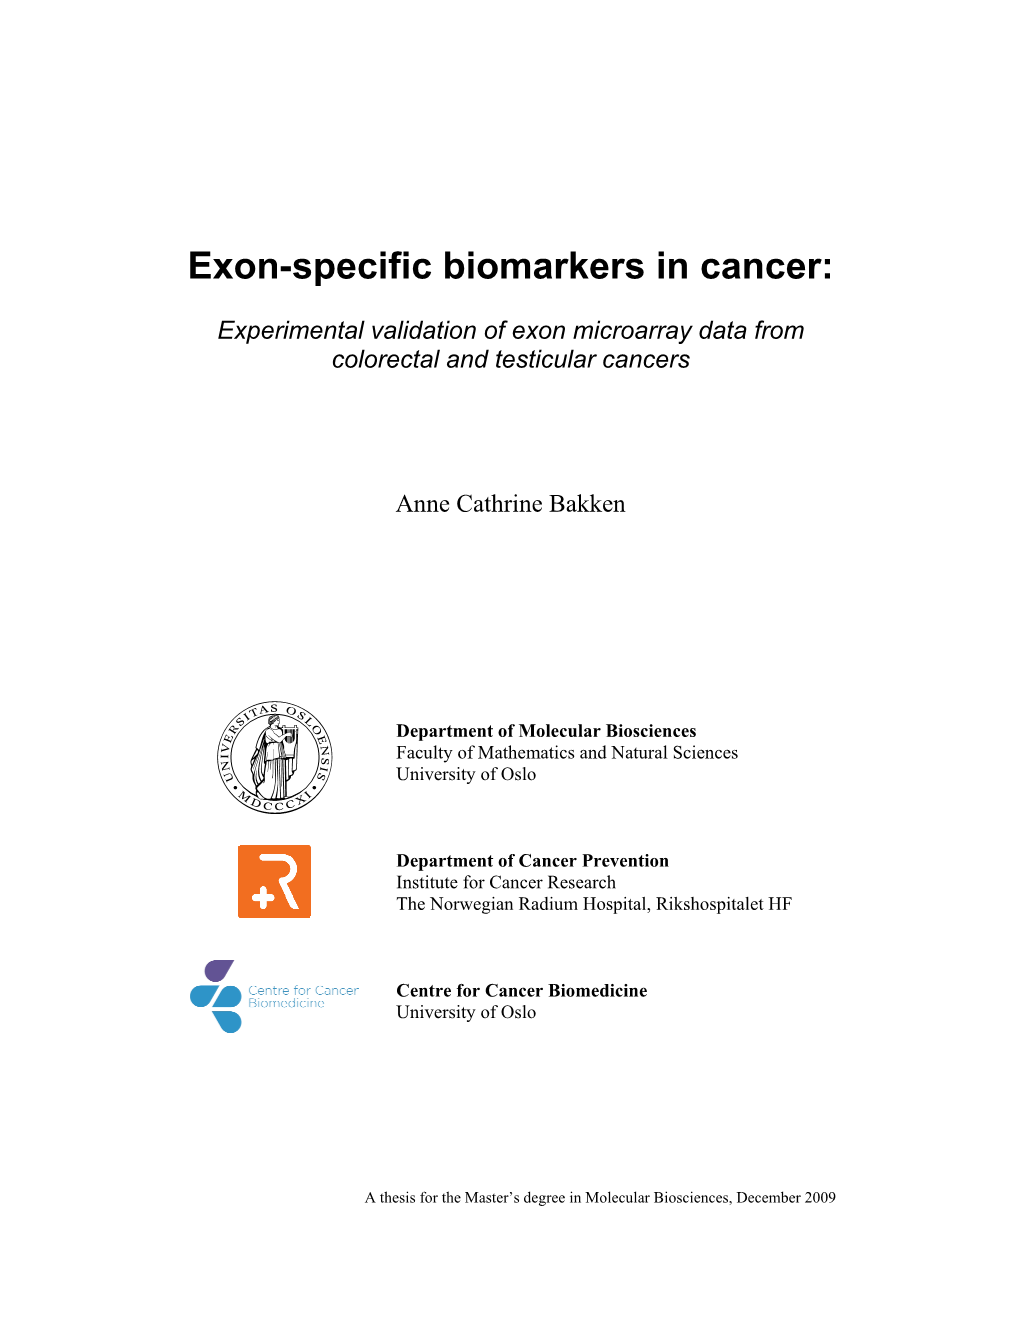 Exon-Specific Biomarkers in Cancer